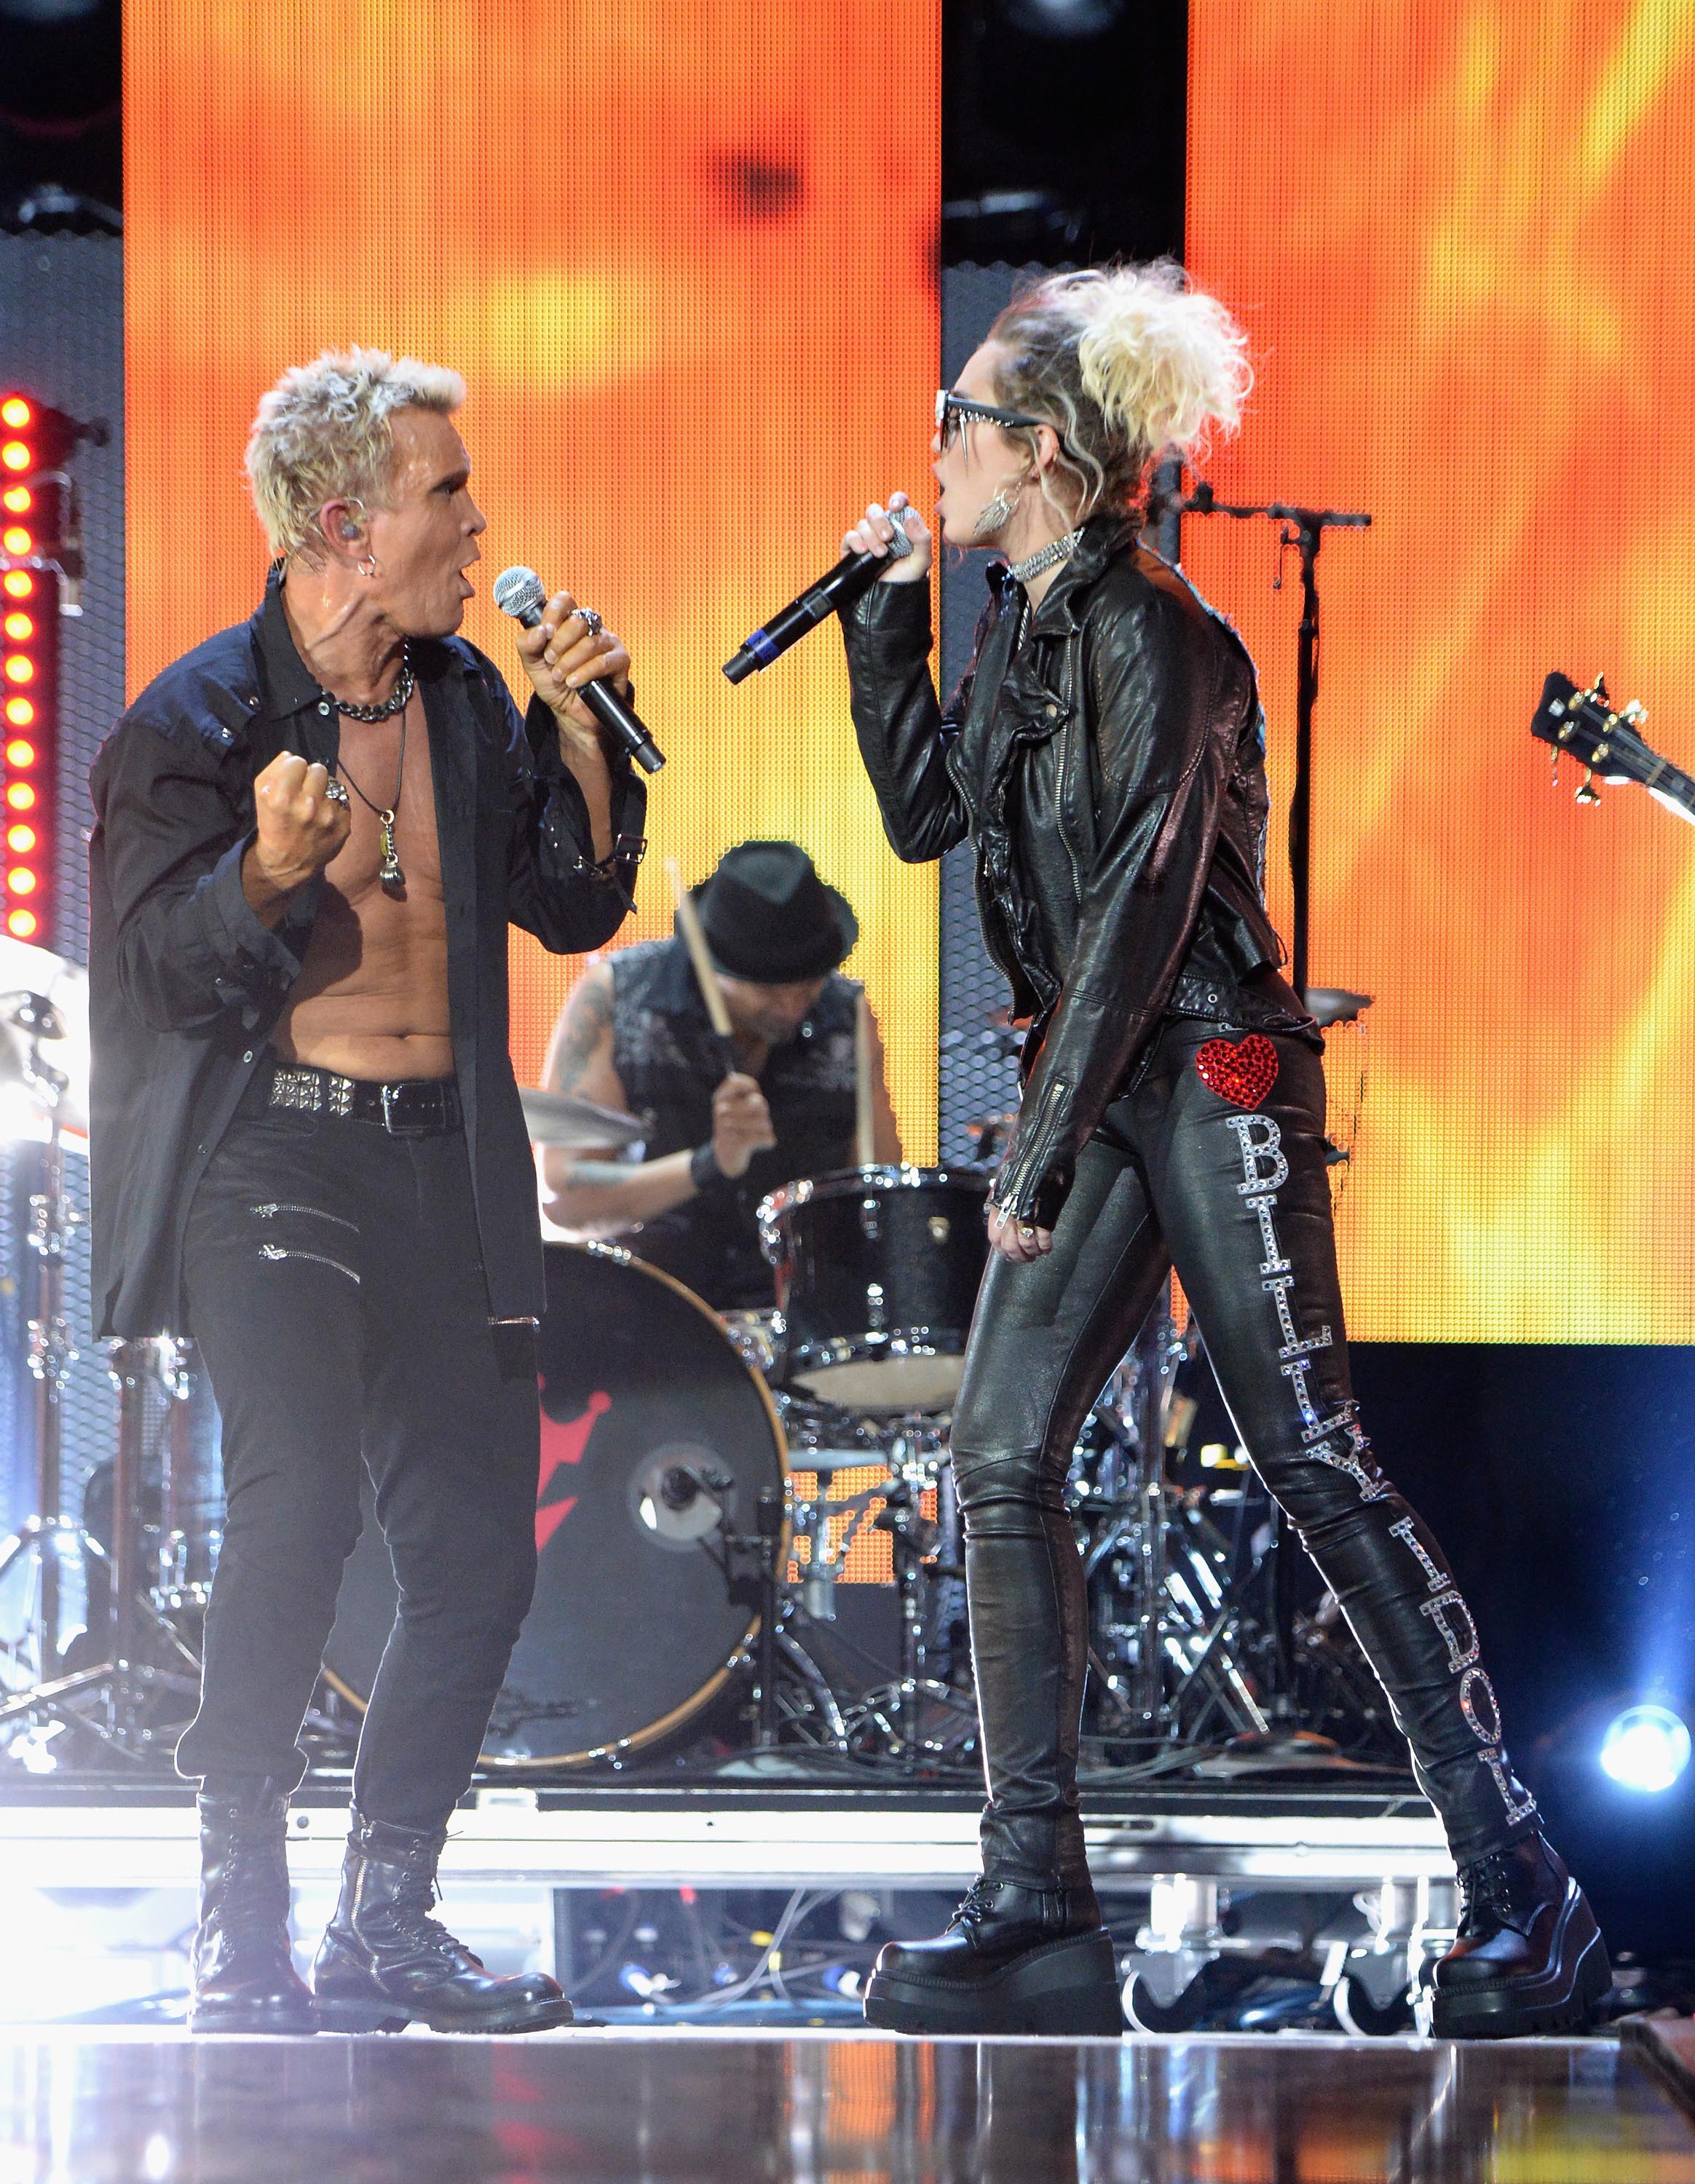 Miley Cyrus duet with Billy Idol at the 2016 iHeartRadio Music Festival